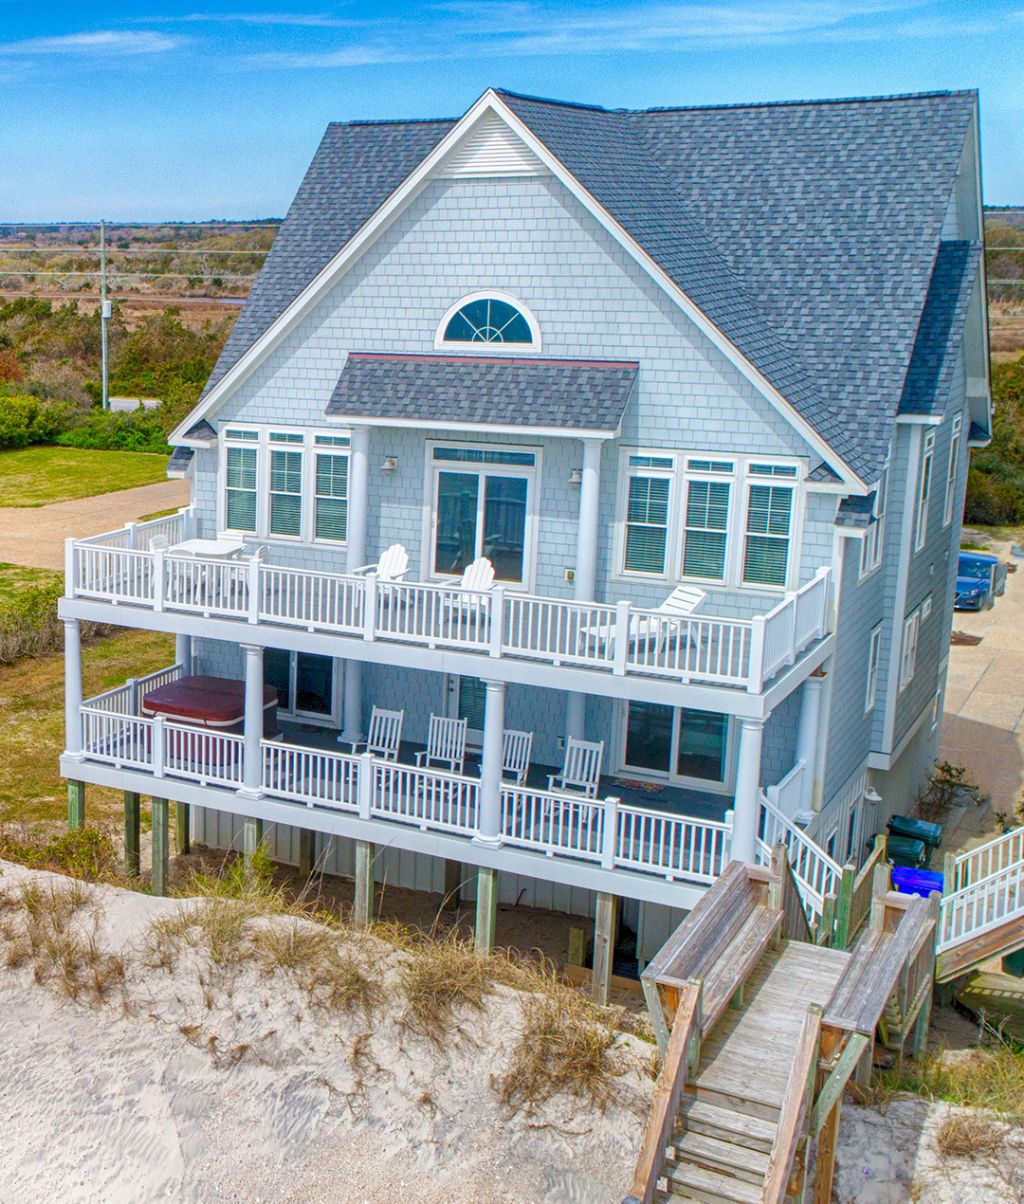 Island Drive 4316 : 7 Bedroom Holiday Rental in North Topsail Beach NC ...